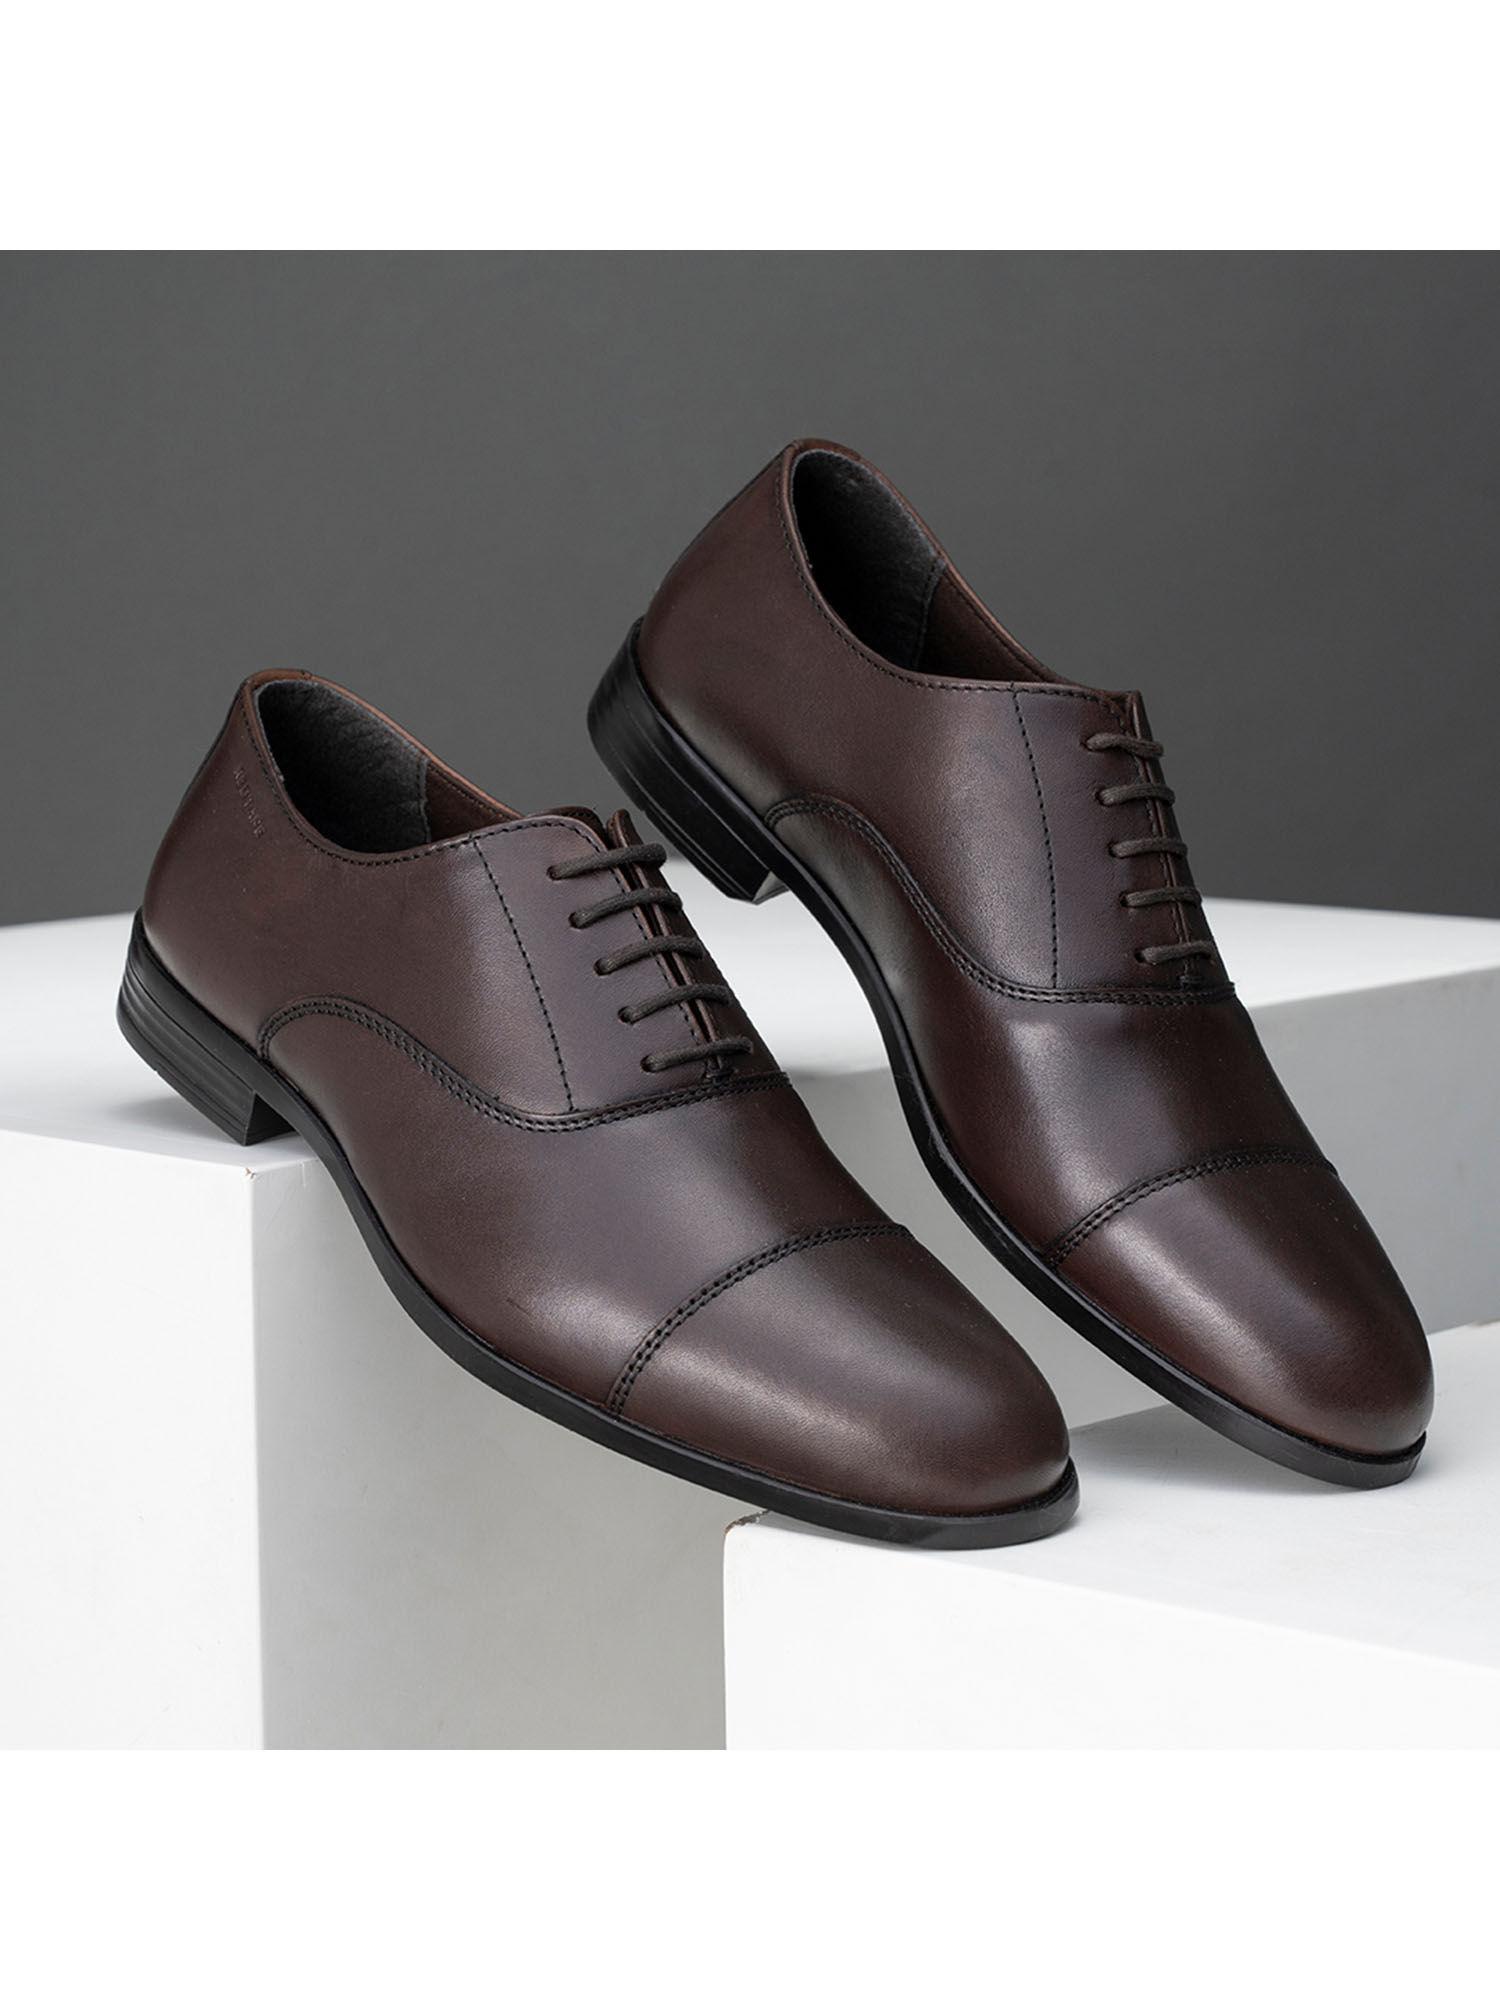 mens solid brown formal oxford shoes